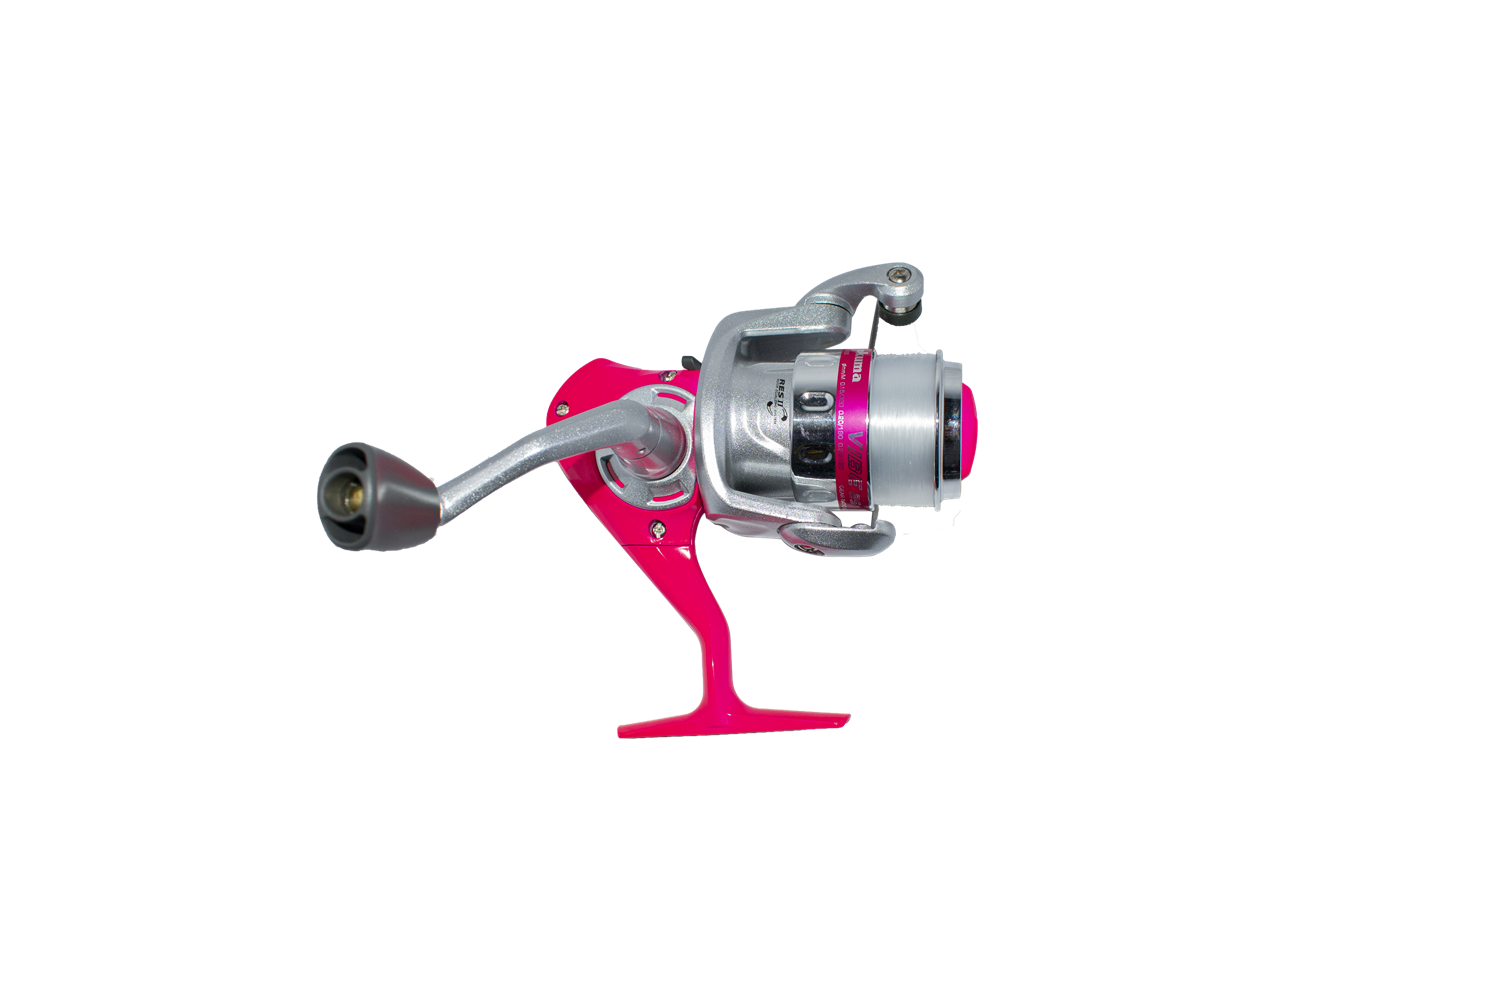 https://www.compositedevelopments.co.nz/cdn/images/products/large/602M_pink_reel_solo_636779745315881094.png